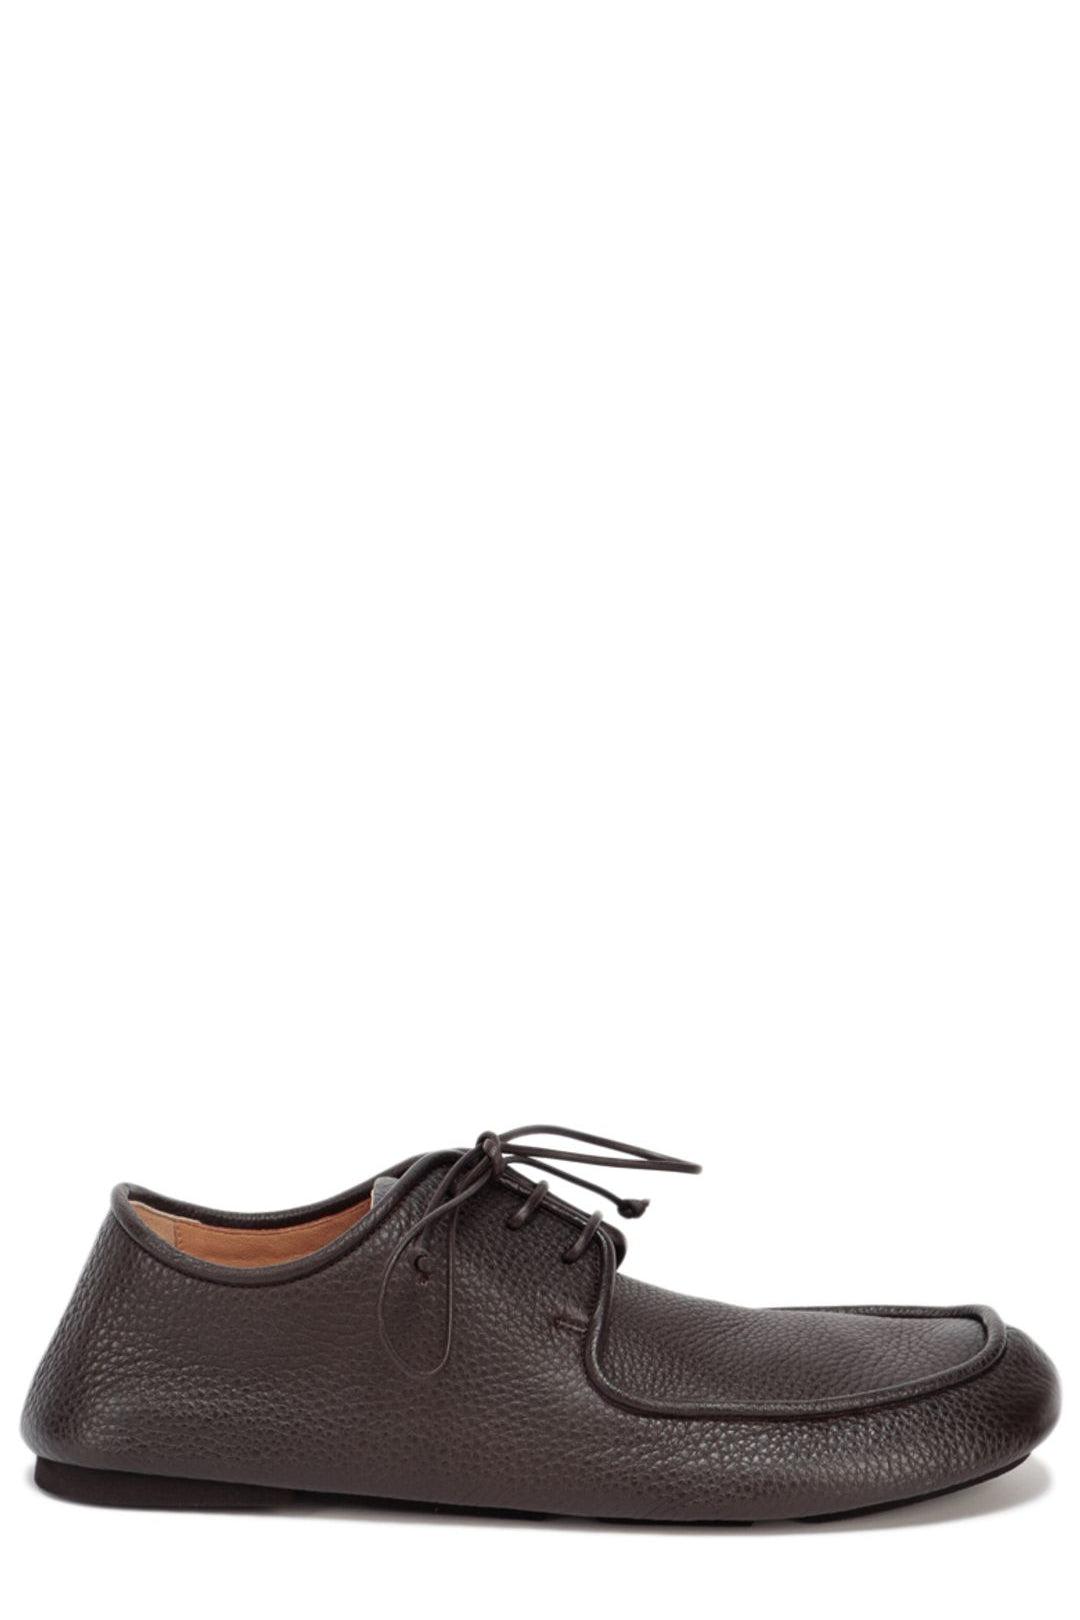 Marsell Toddone Derby Shoes